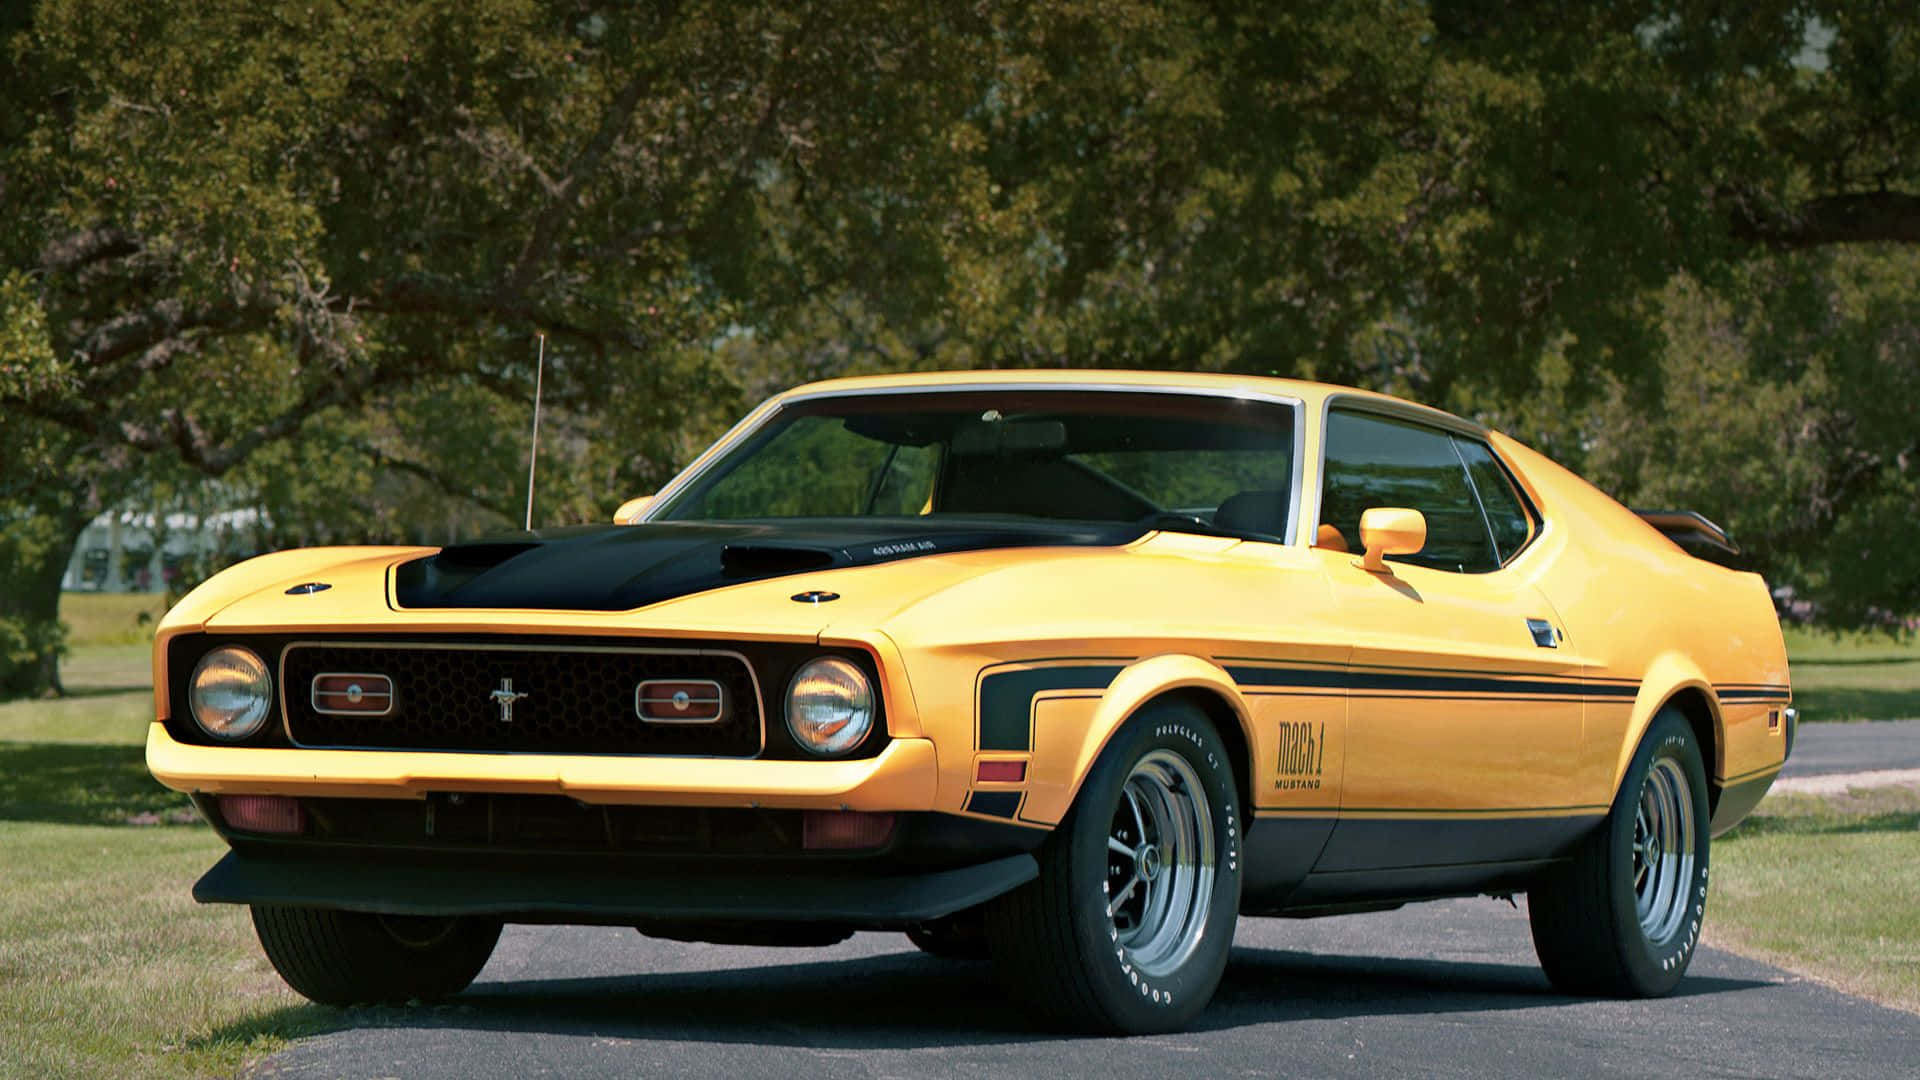 Stunning Ford Mustang Mach 1 in Action Wallpaper